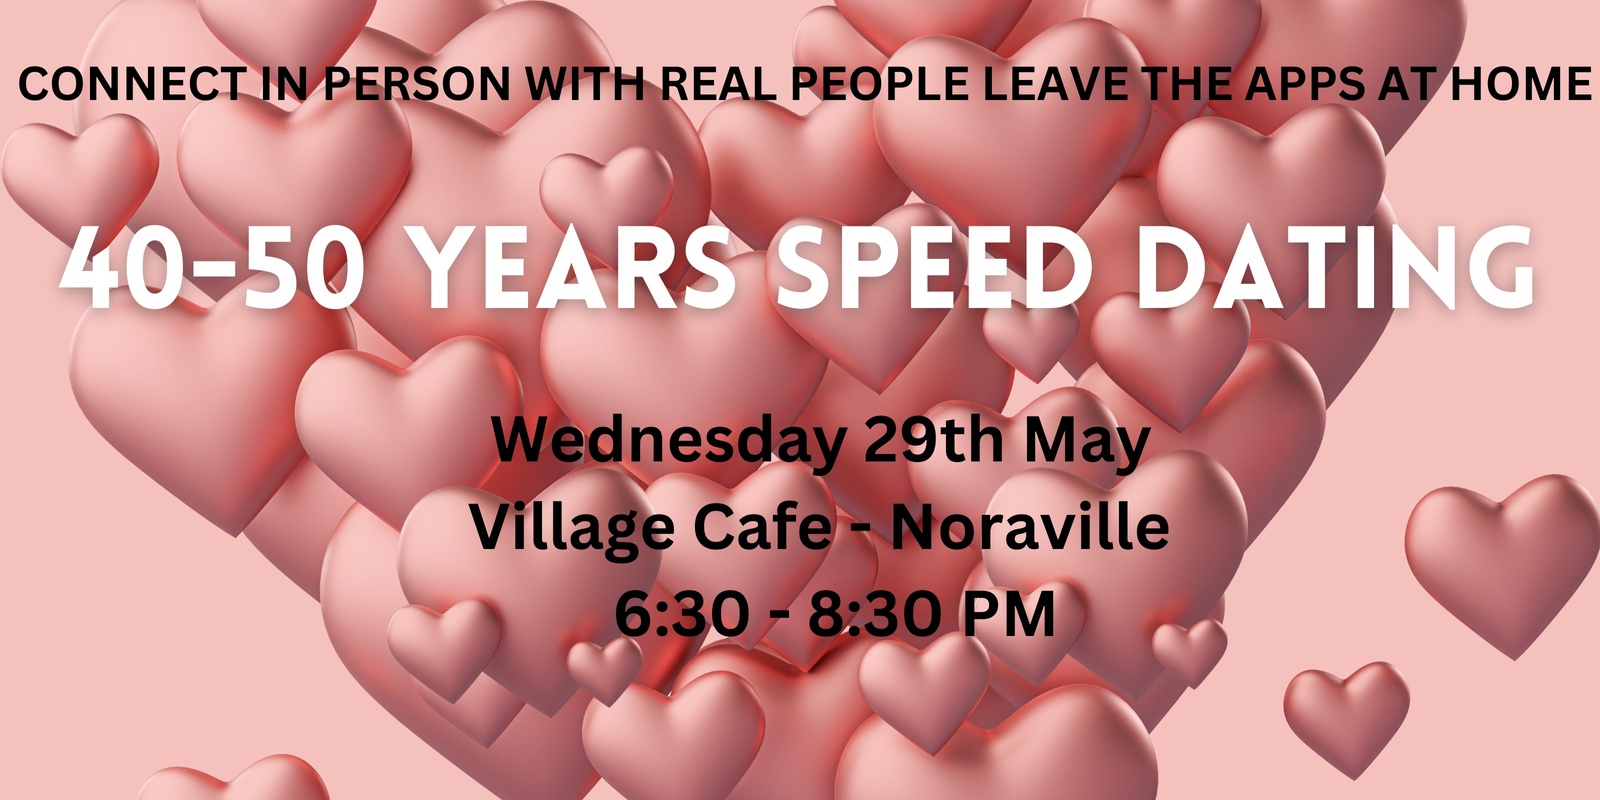 Banner image for 40-50 years Speed Dating 